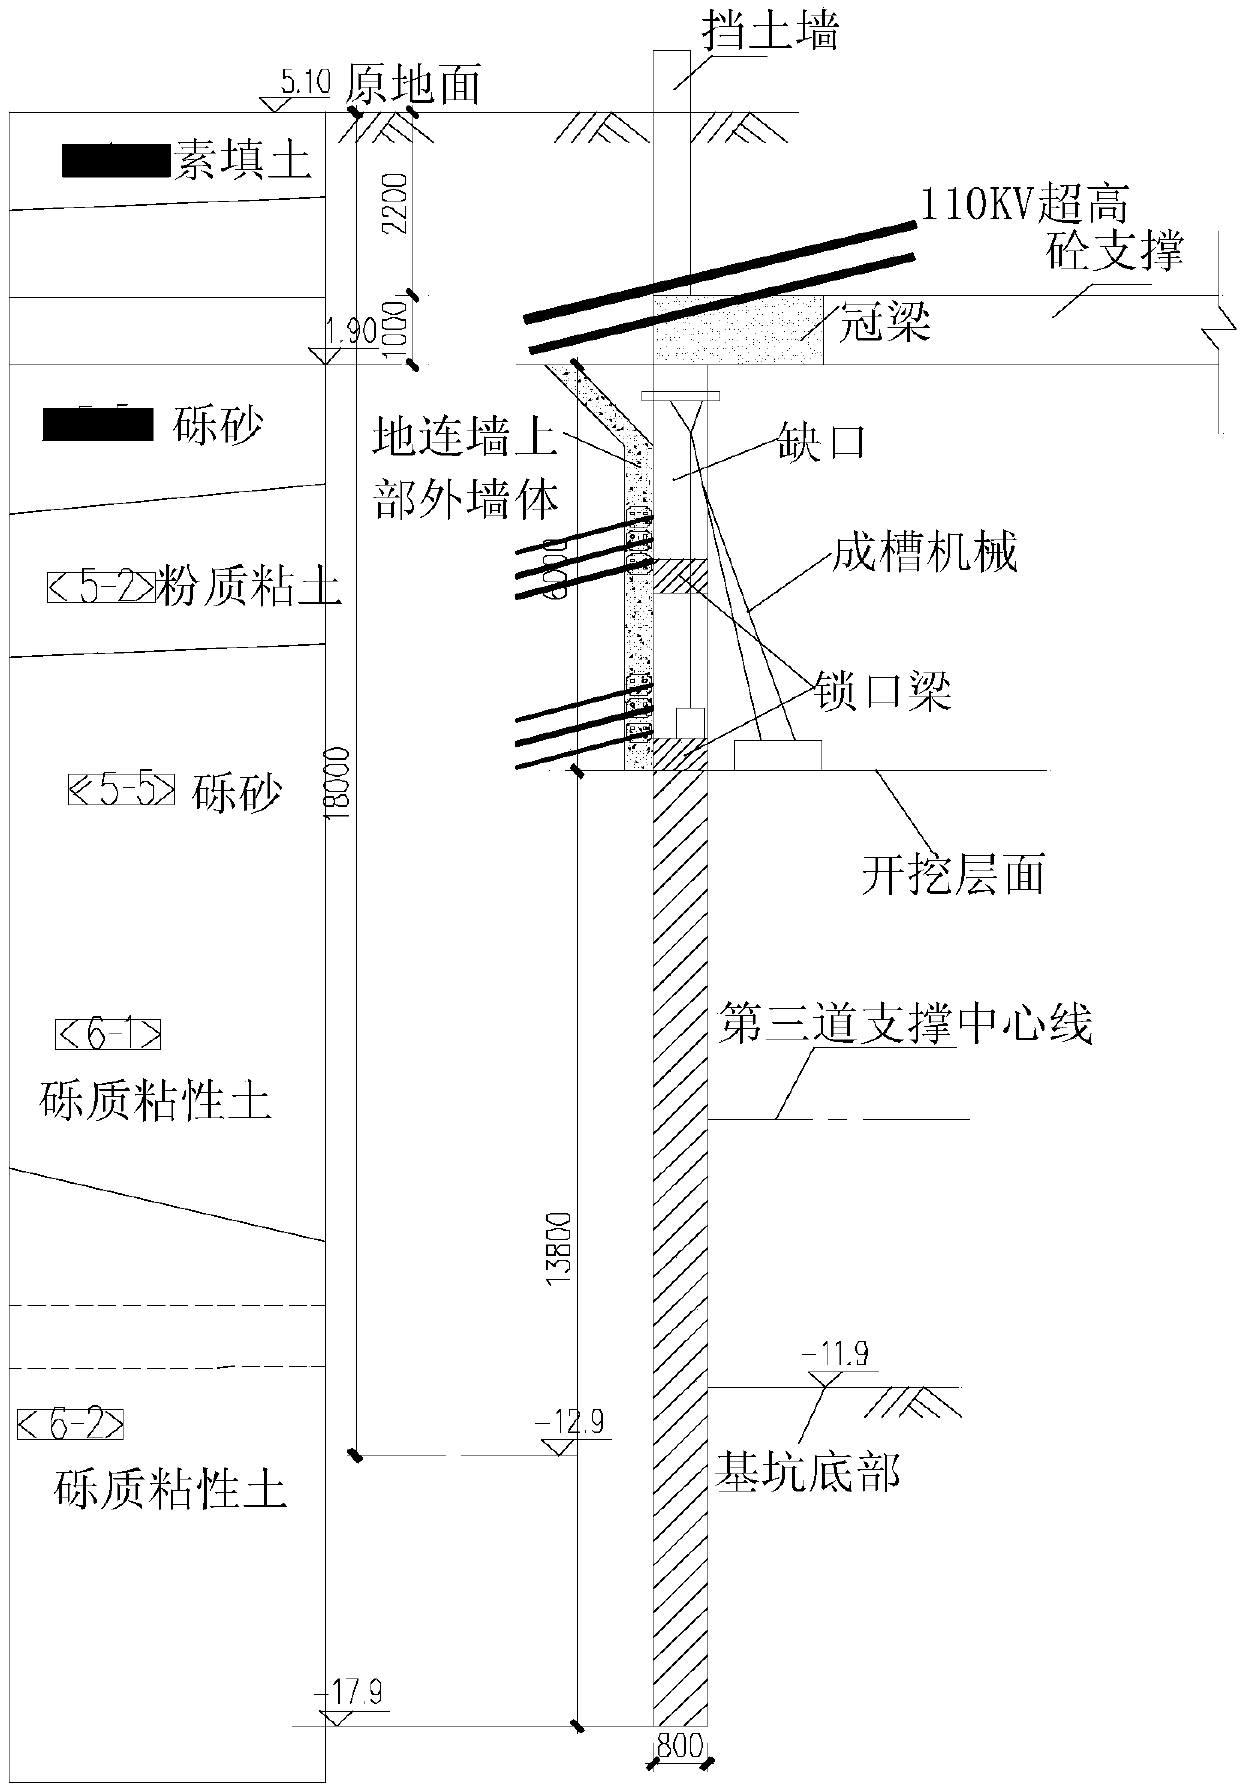 Reverse underground continuous wall construction method